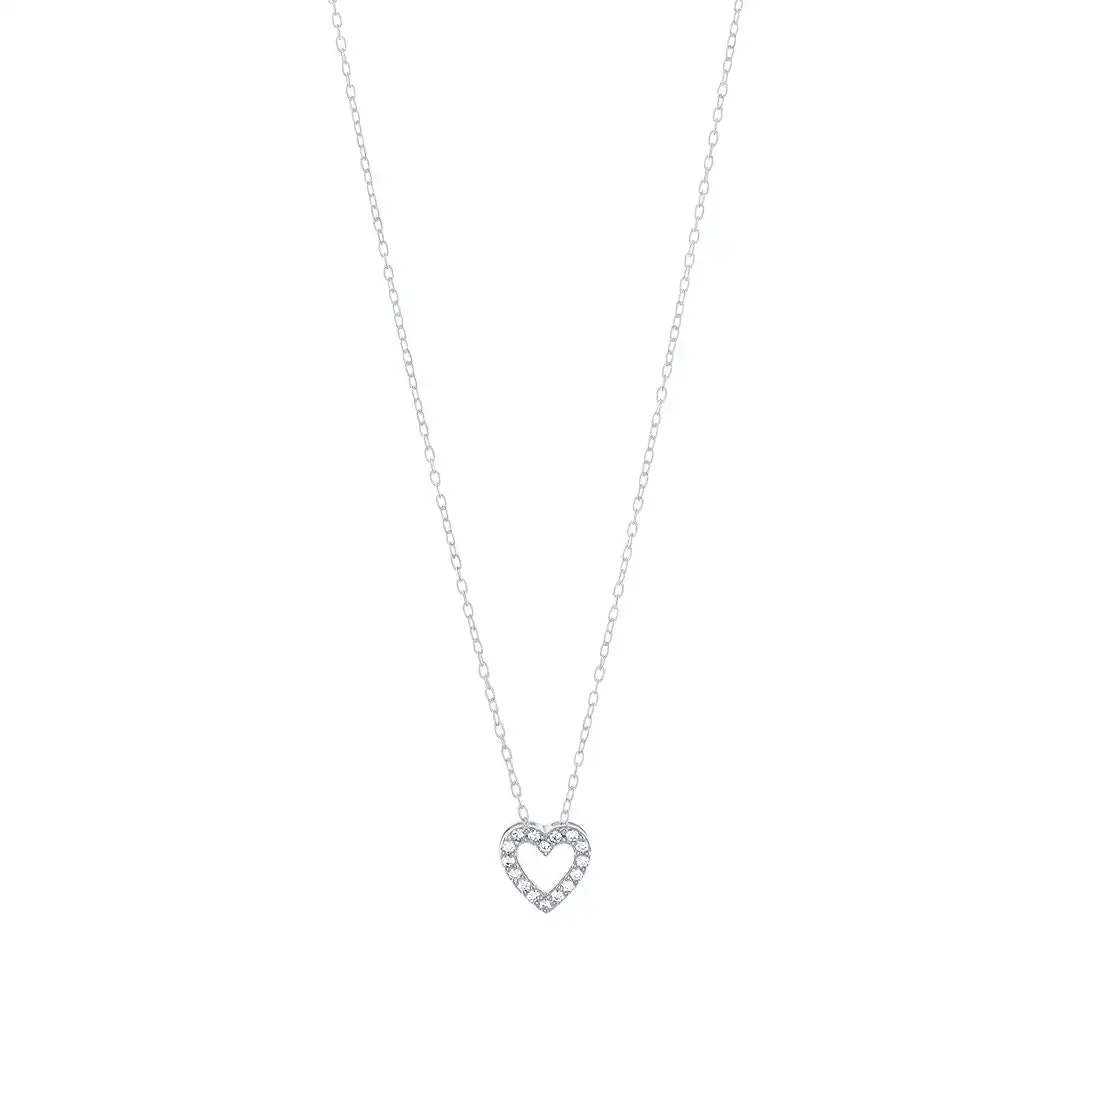 40cm Open Heart Necklace with Cubic Zirconia in Sterling Silver